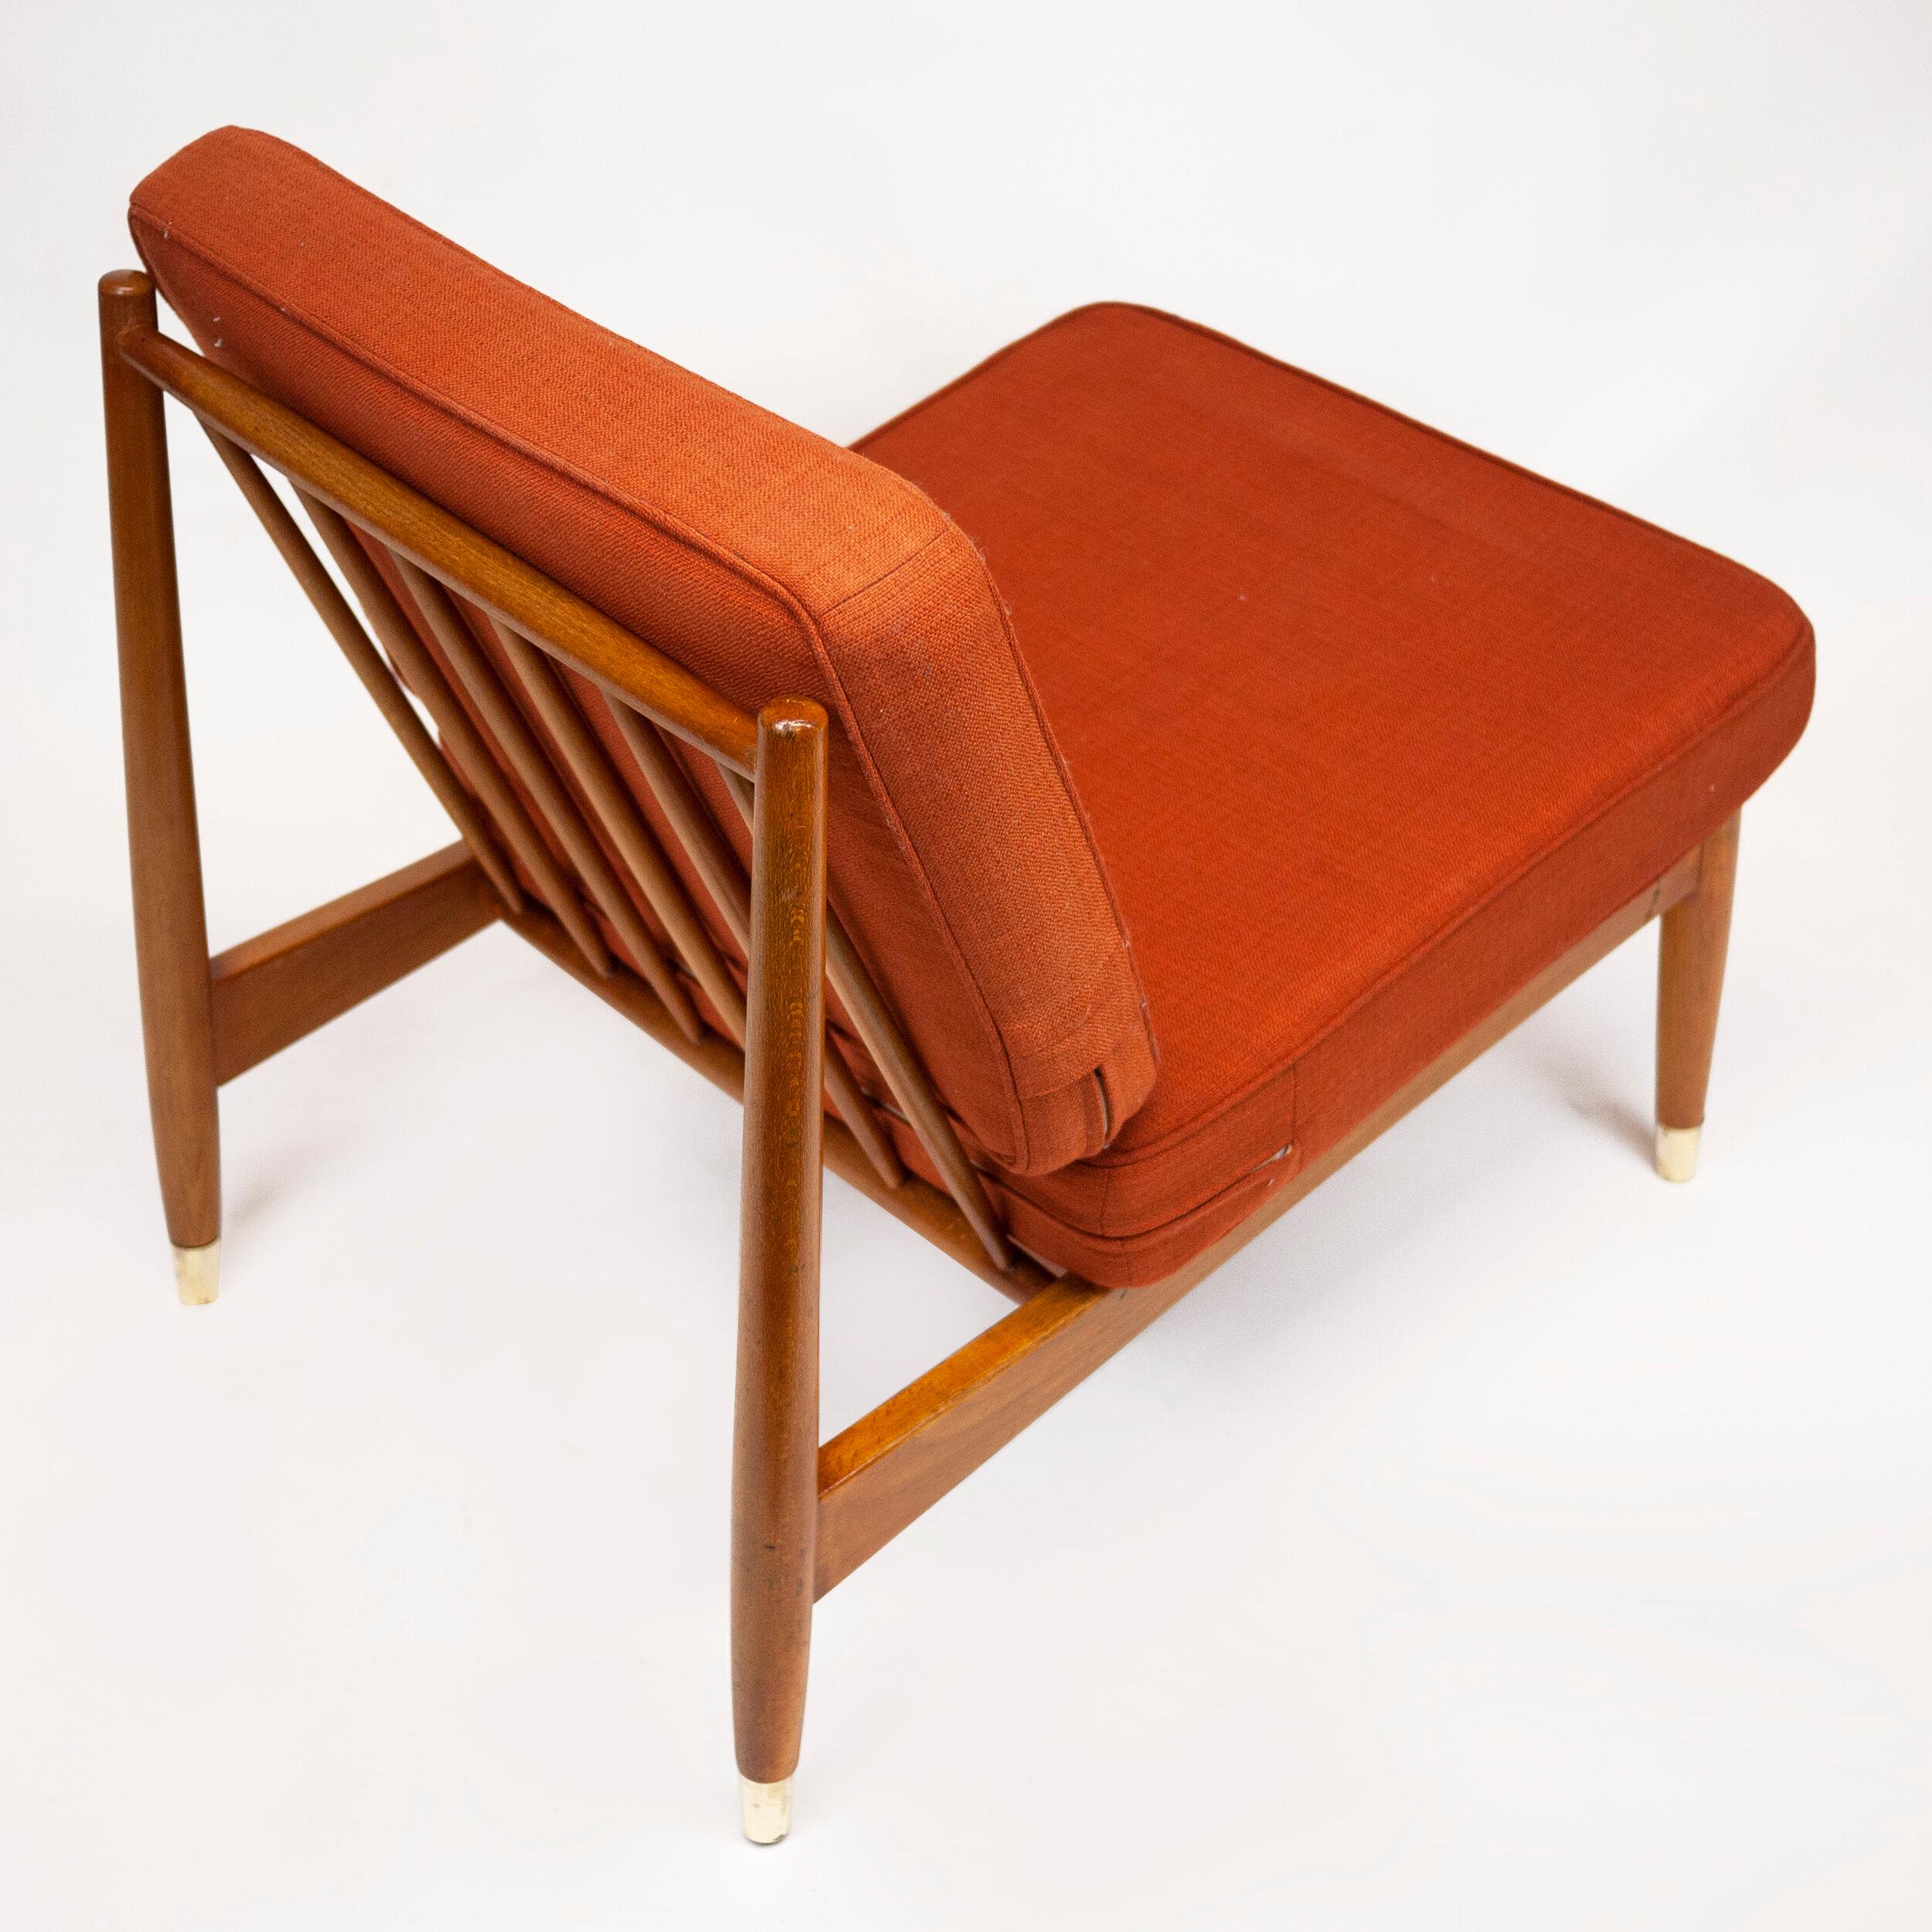 Swedish Beech Low Lounge Chair by Folke Ohlsson for Dux, 1960s For Sale 2